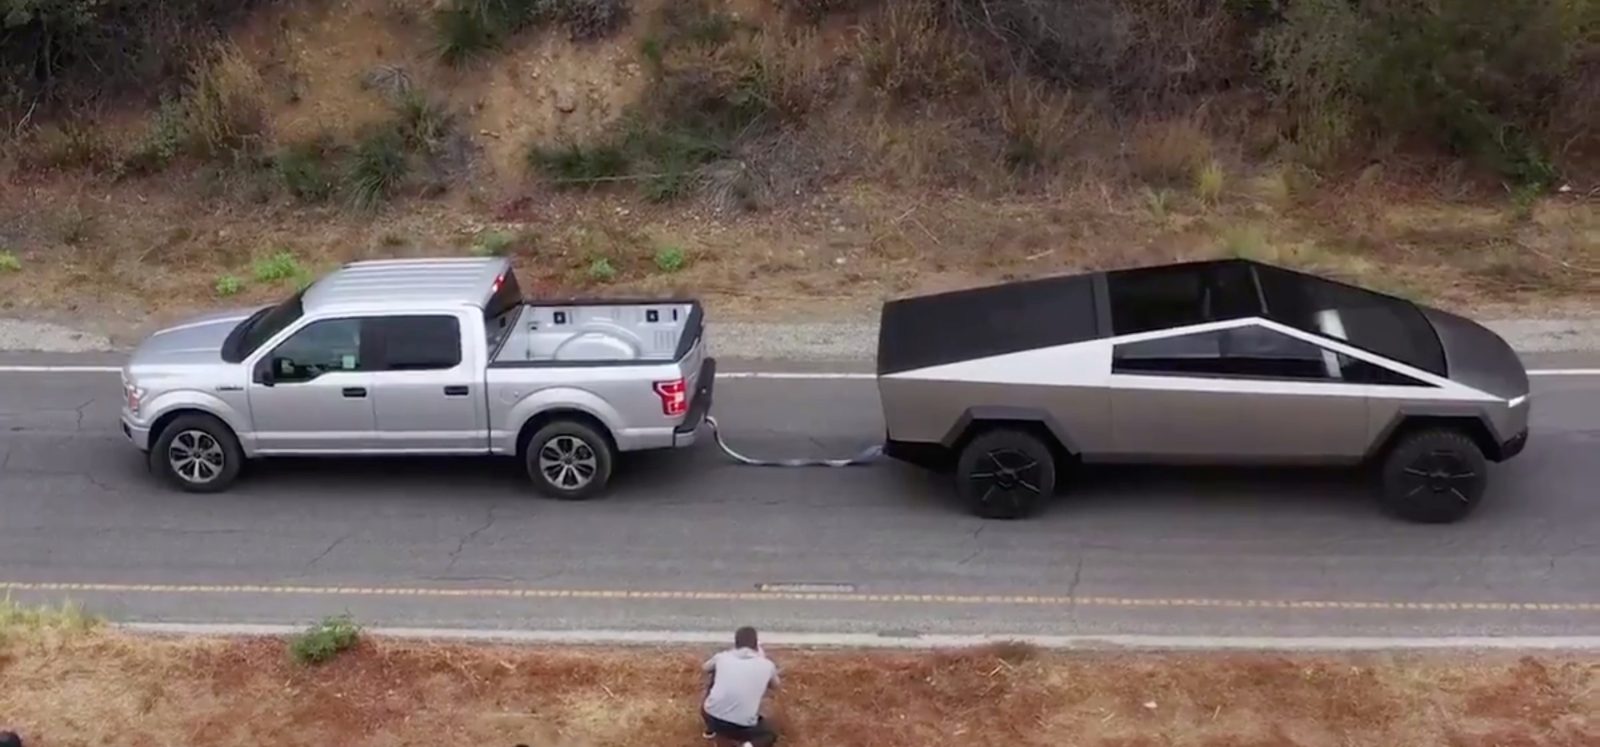 watch tesla cybertruck in tug of war against ford f150 and size parison